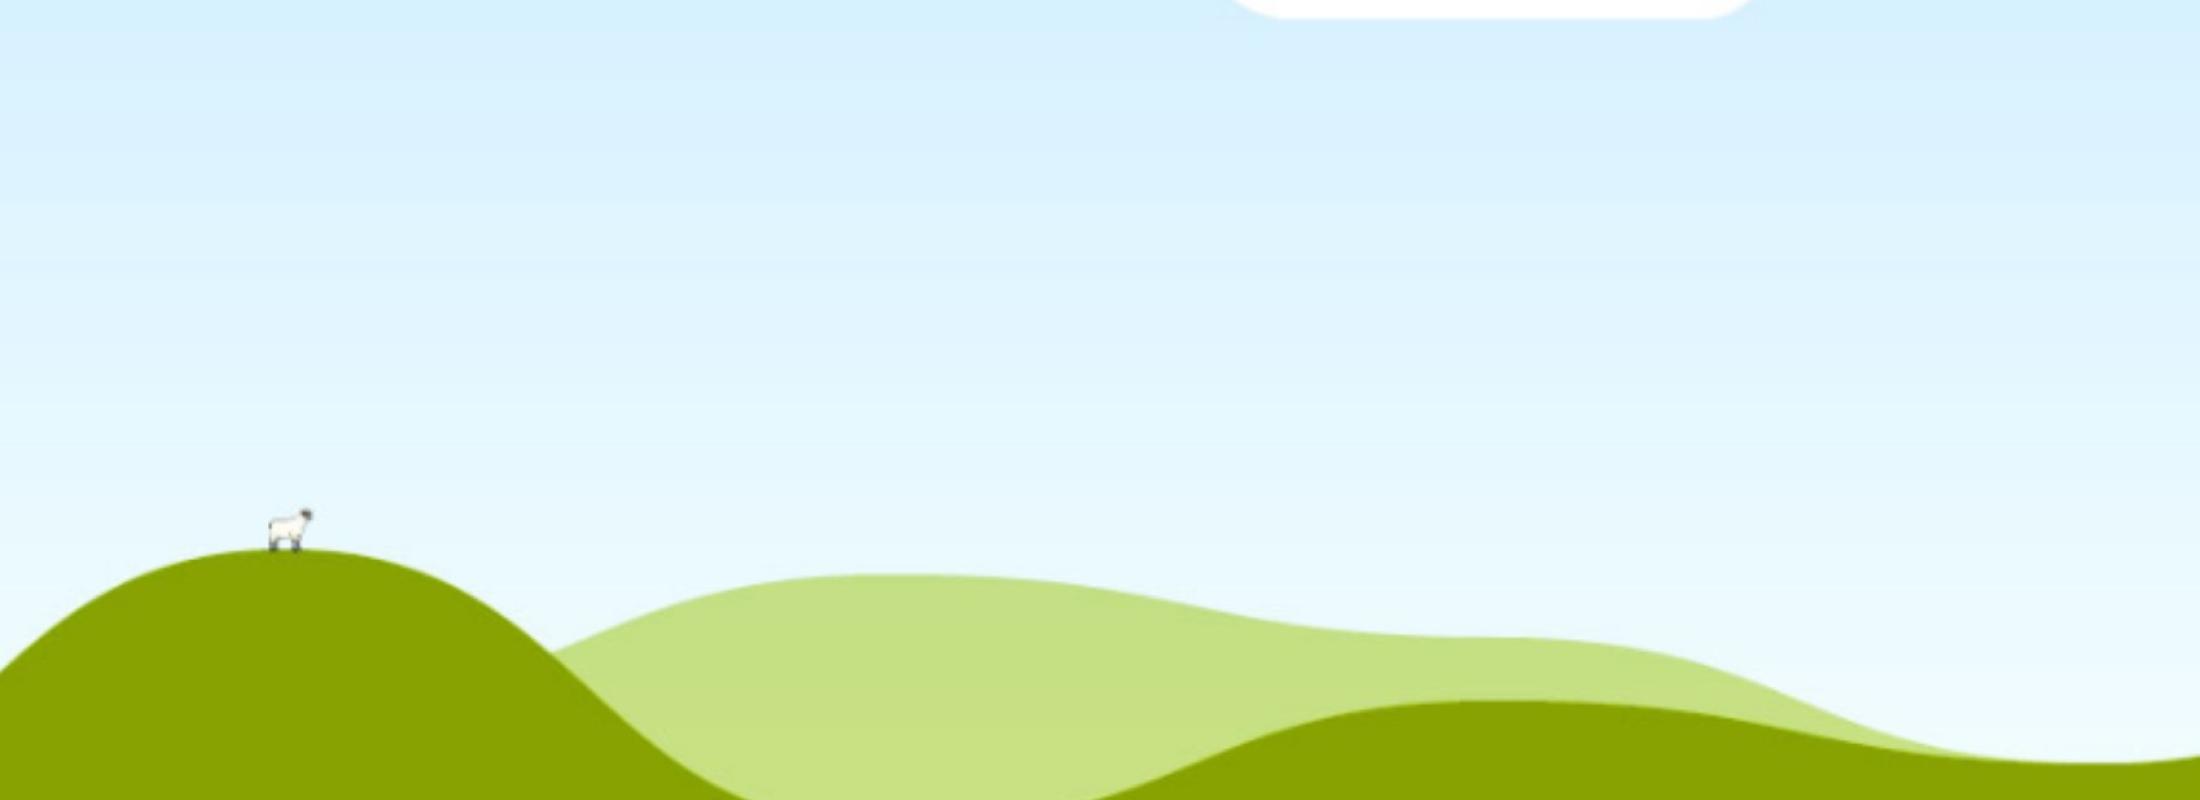 Banner image of a drawn landscapes with green hills and blue skies.